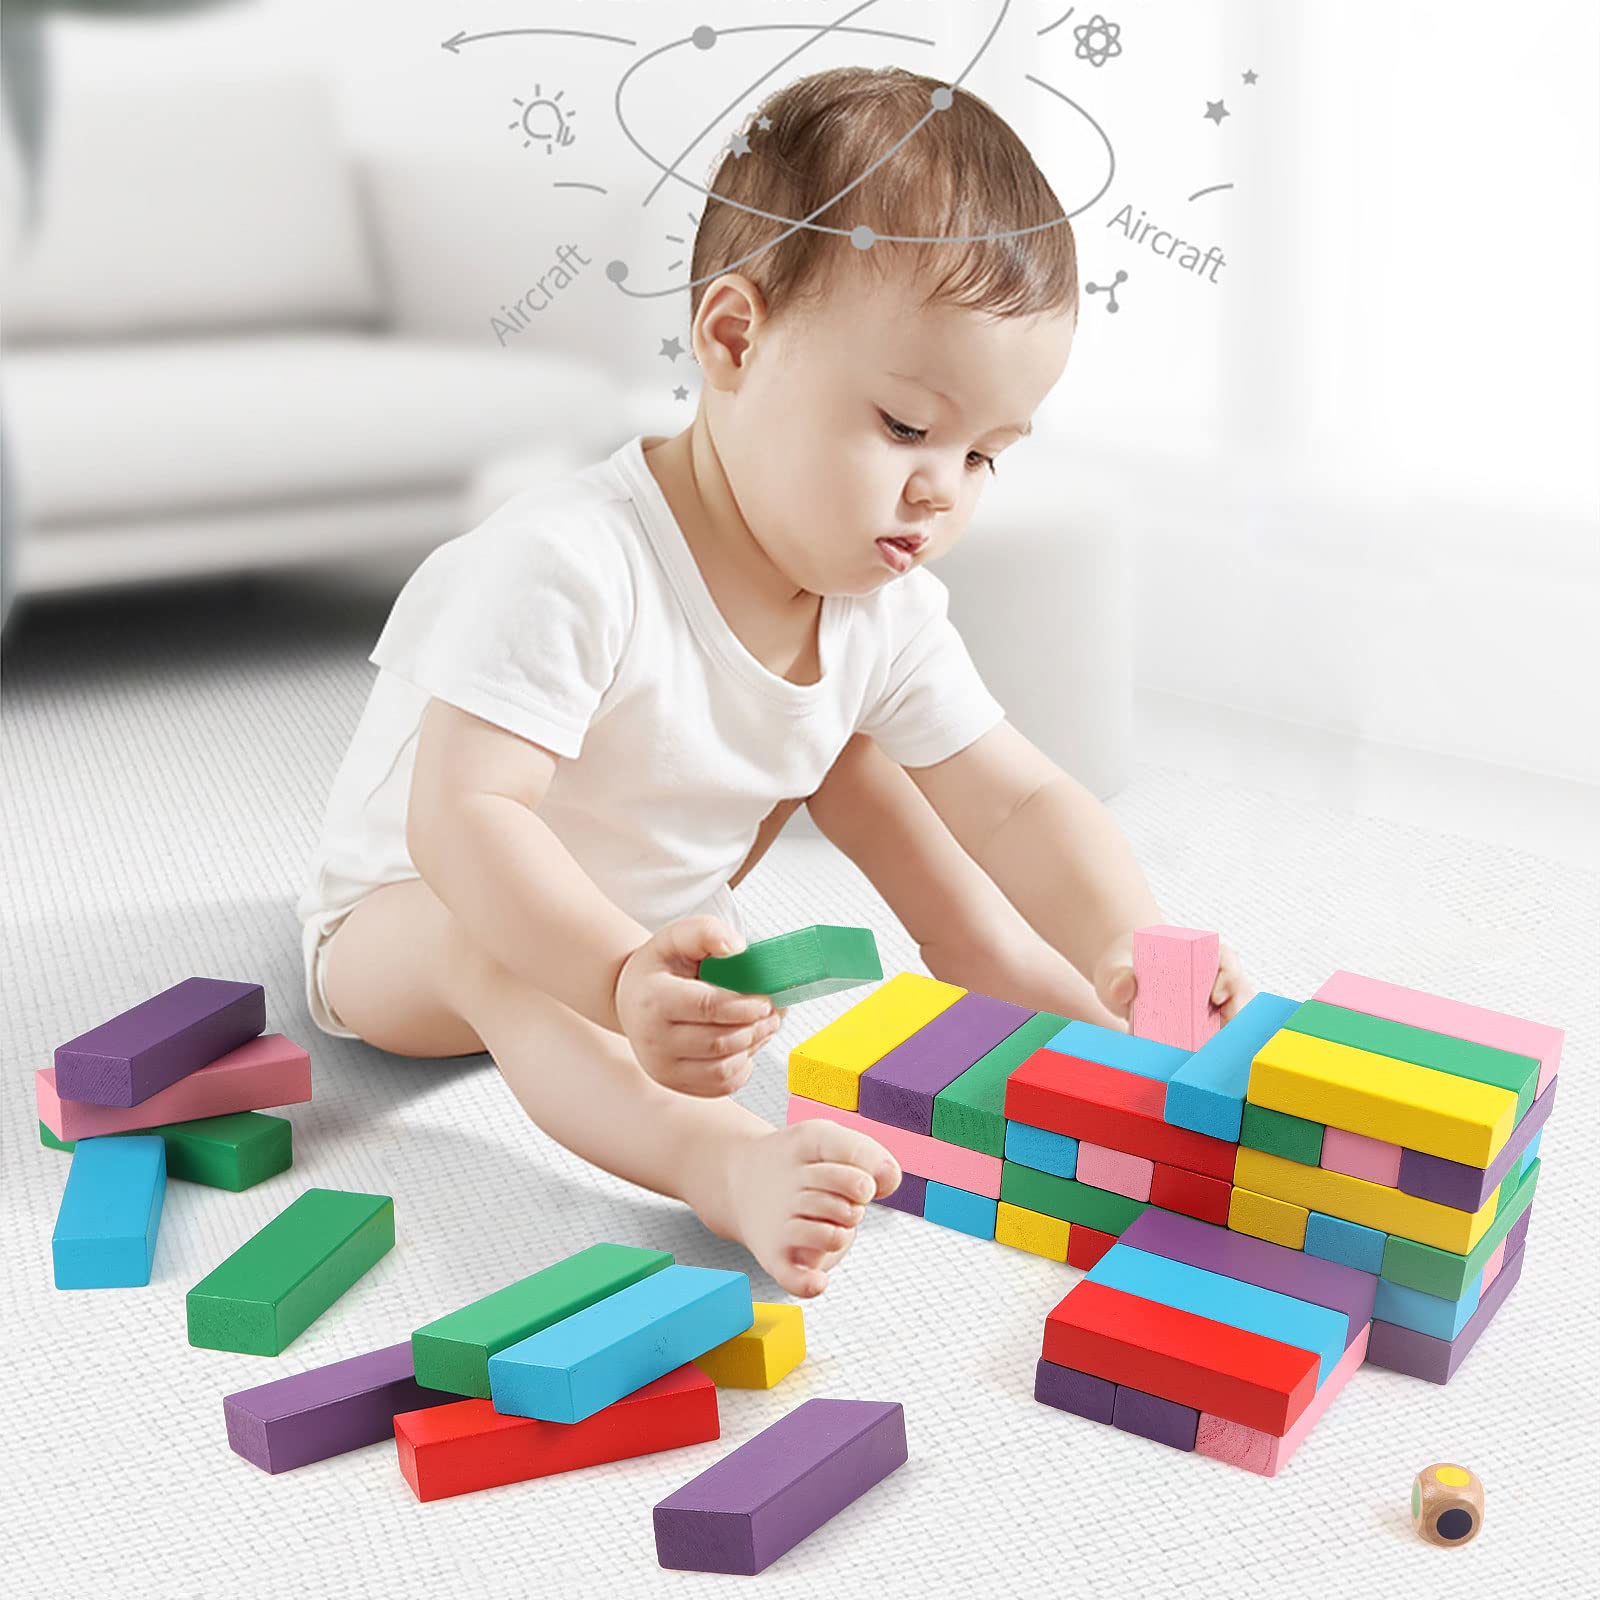 Canuan Wooden Blocks Stacking Games, 48PCS Tumbling Stacking Blocks Game for Kids and Families, Wood Colorful Balancing Blocks Montessori Toys for Kids with Storage Bag